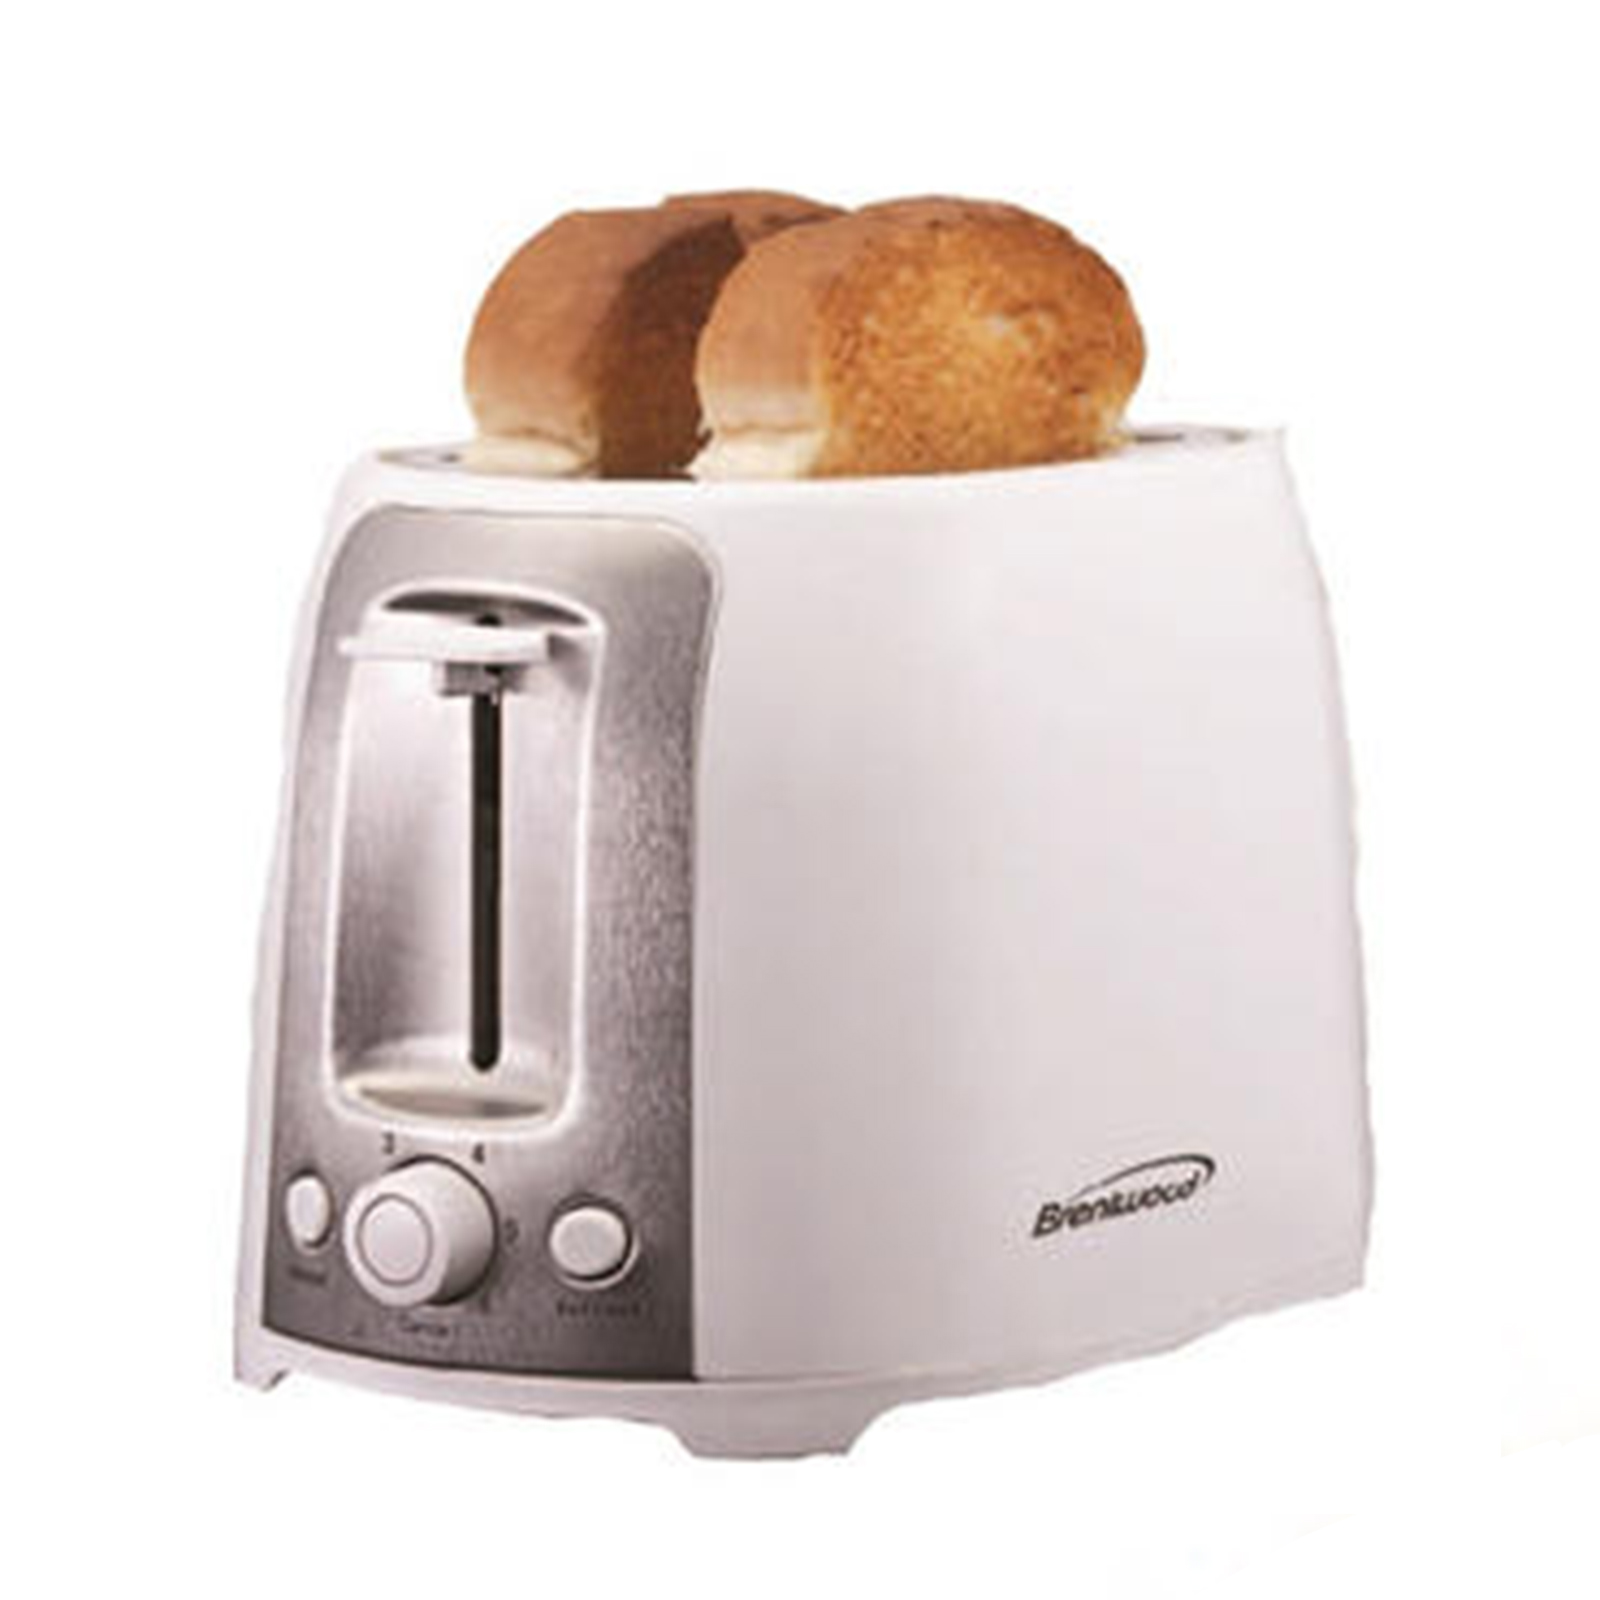 Brentwood 97091230M 2-Slice Cool Touch Toaster in White and Stainless Steel